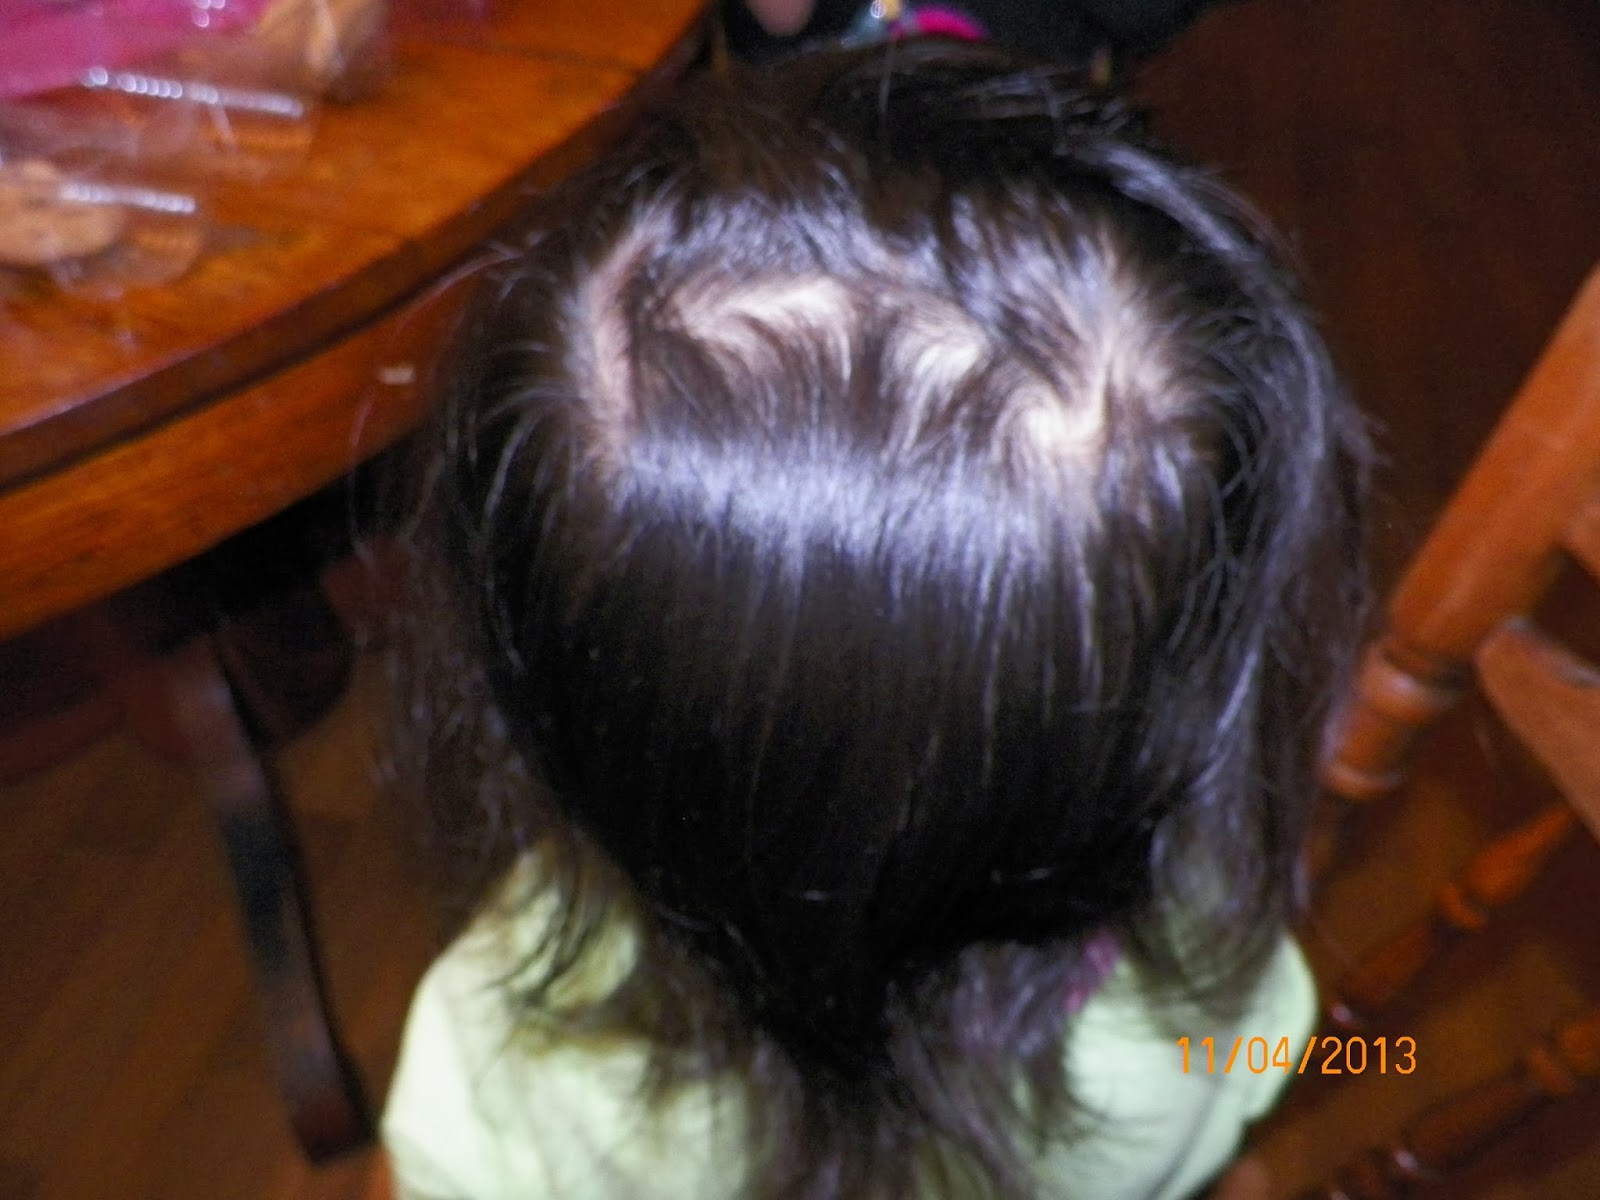 mygreatfinds: Both my daughters have double cowlicks/hair whorls!